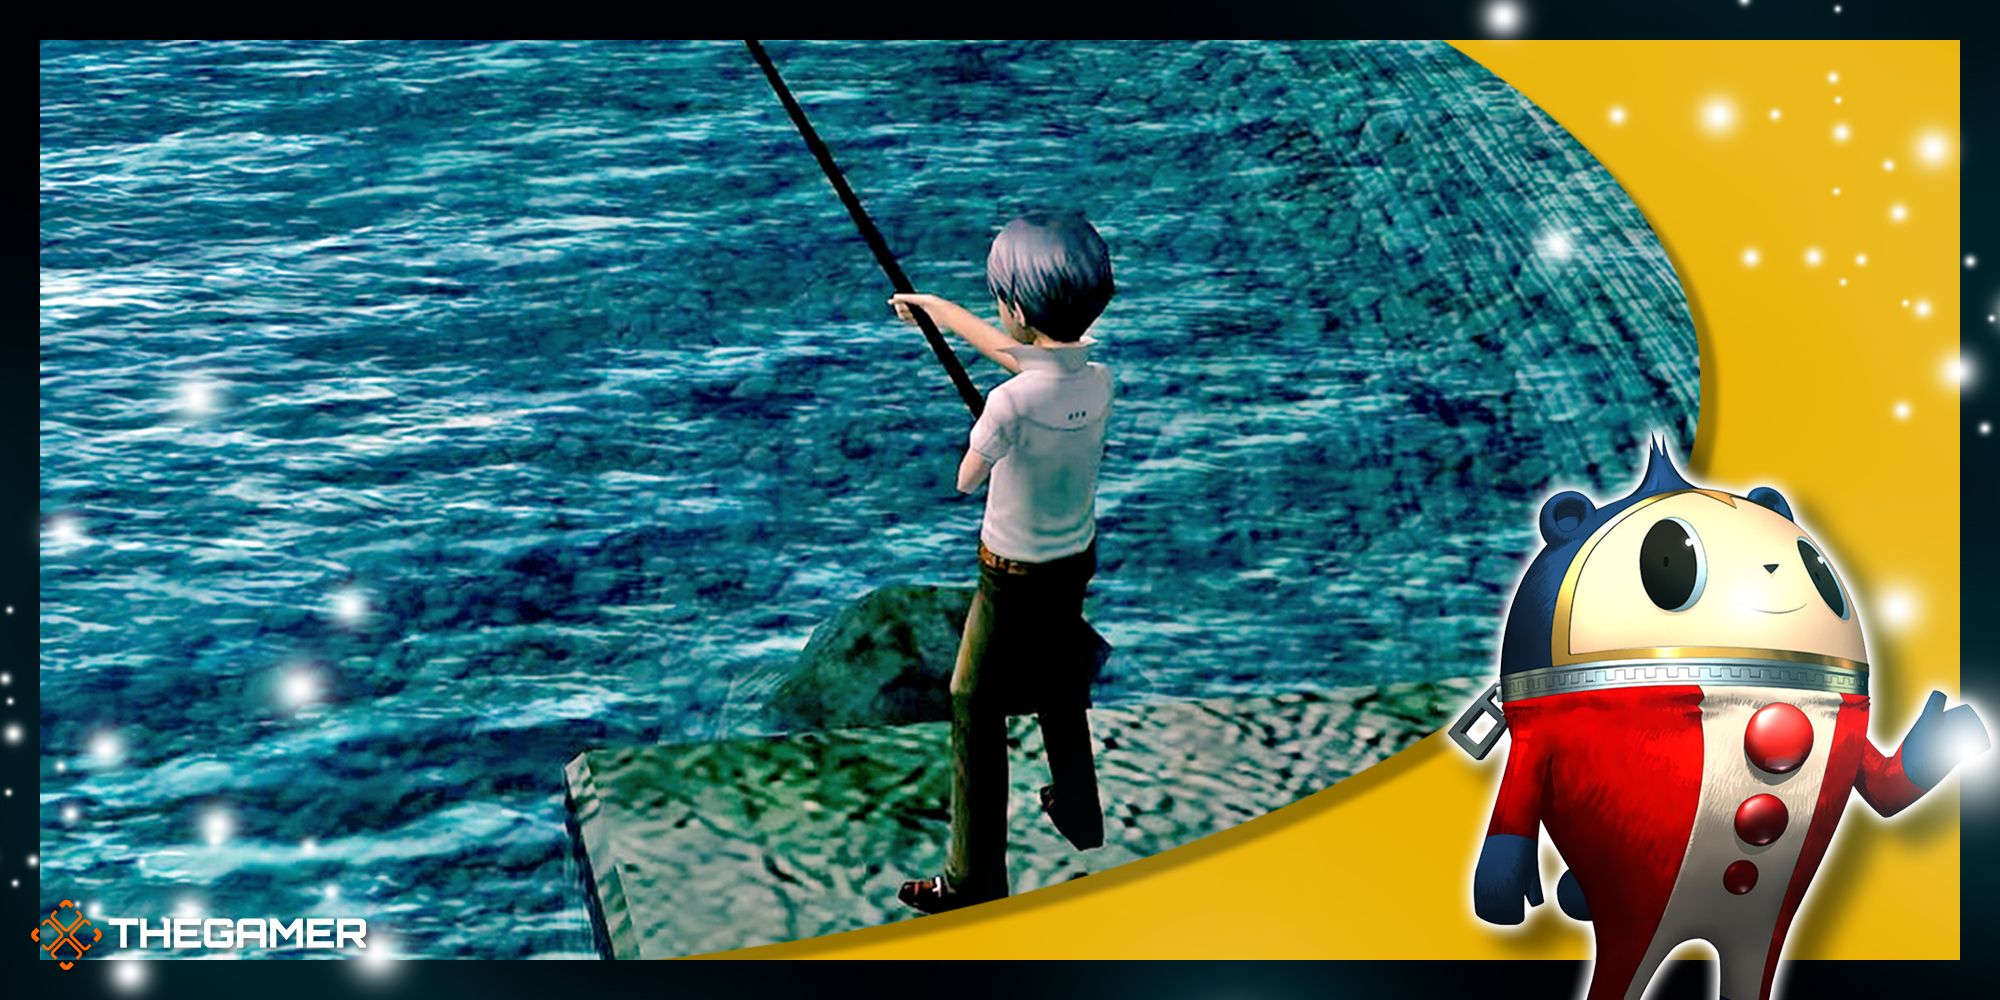 Persona 4 Golden - Yu fishing with a Teddie overlay in the corner.